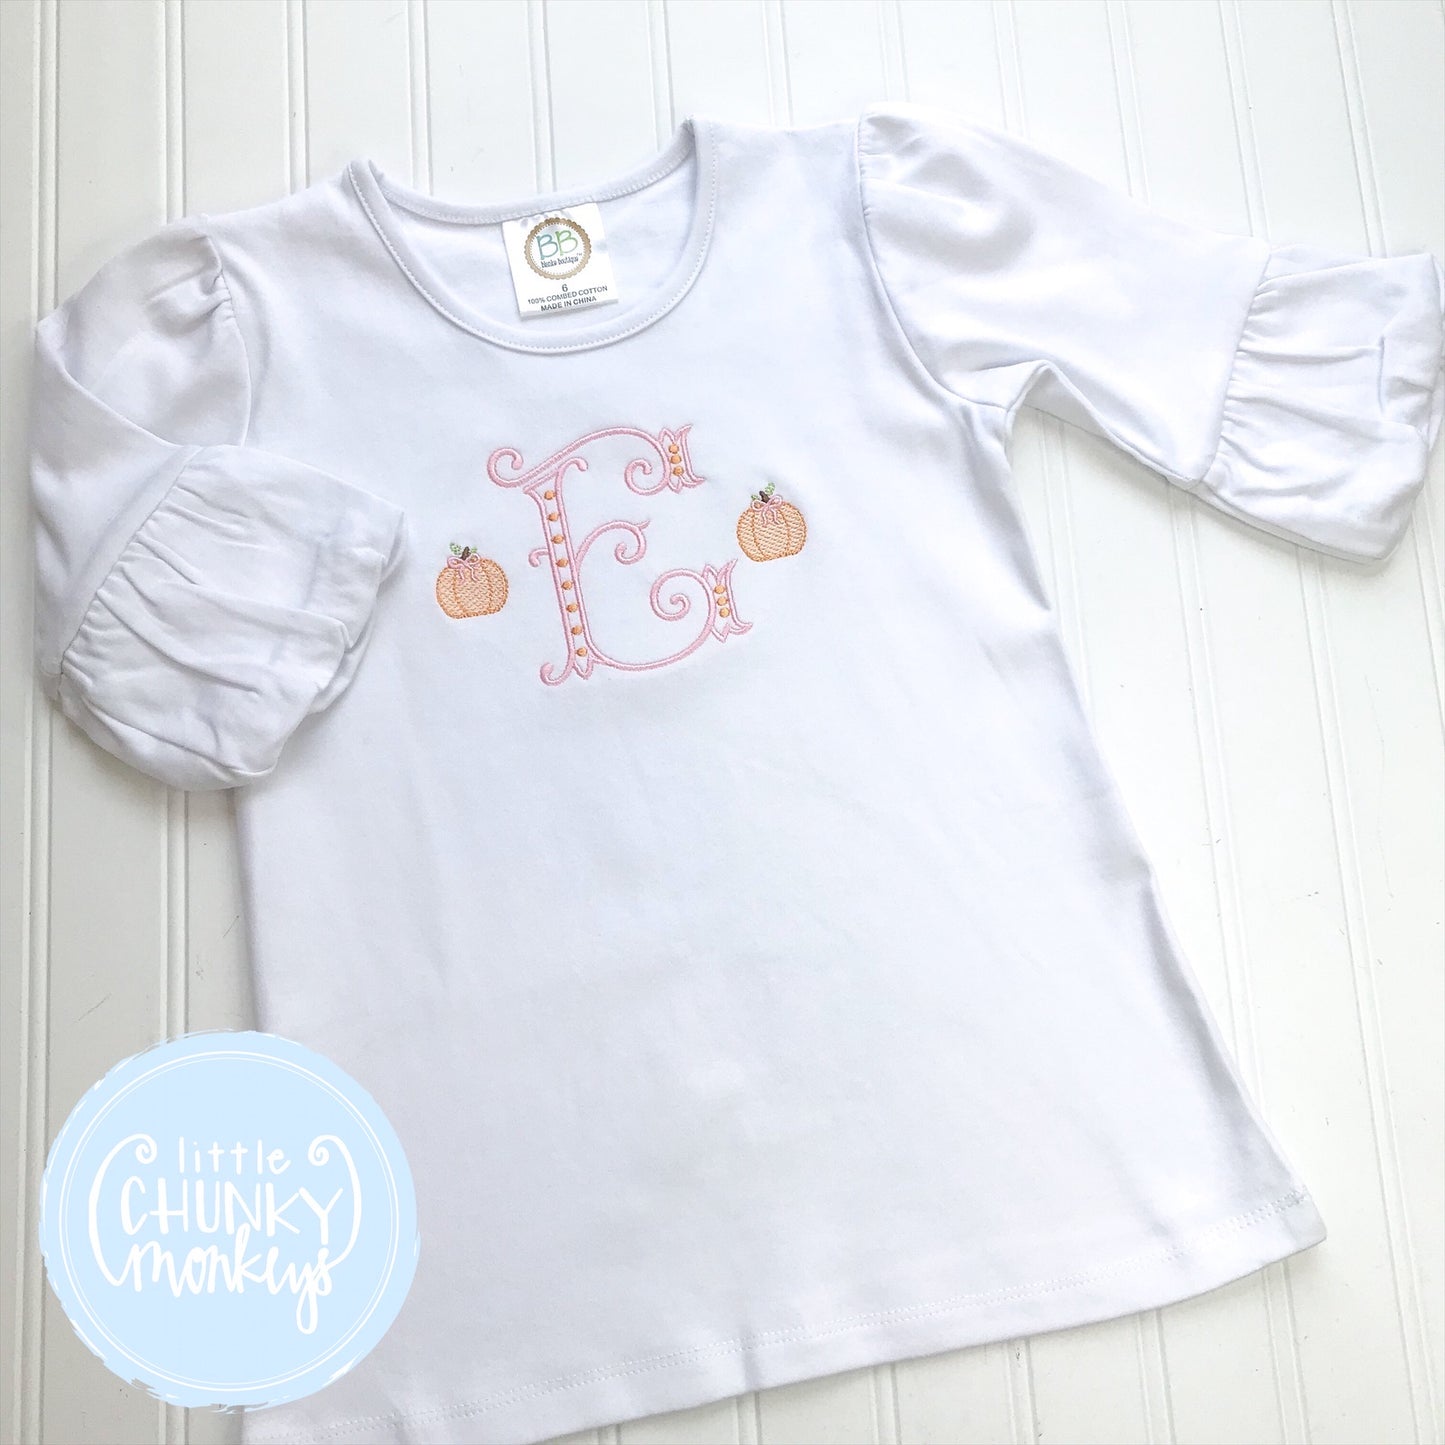 Girl Shirt- Stitched Single Initial with Mini Pumpkins on Each Side